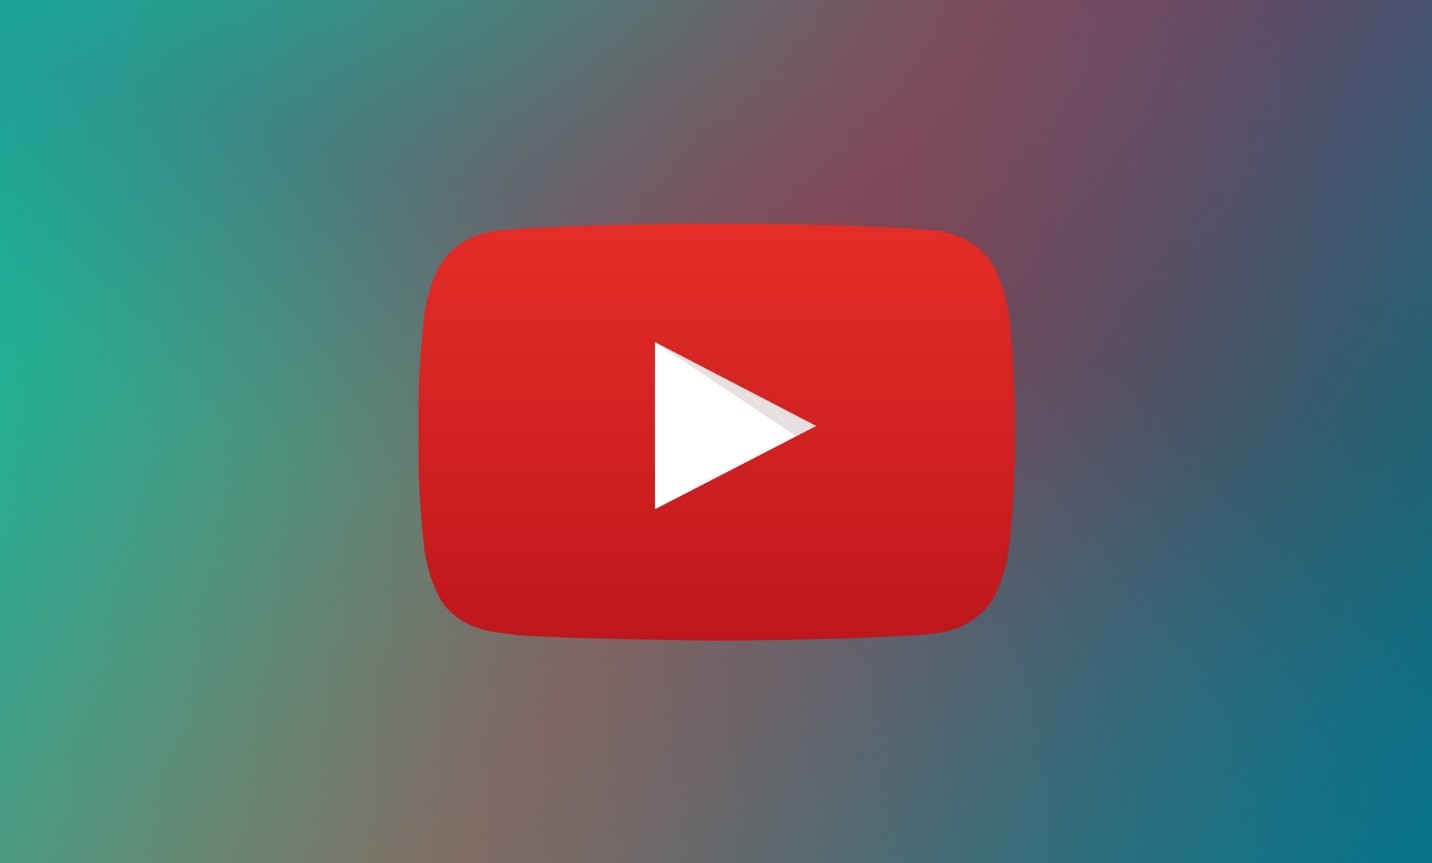 Video learning, learning videos, YouTube learning videos, learning on Youtube